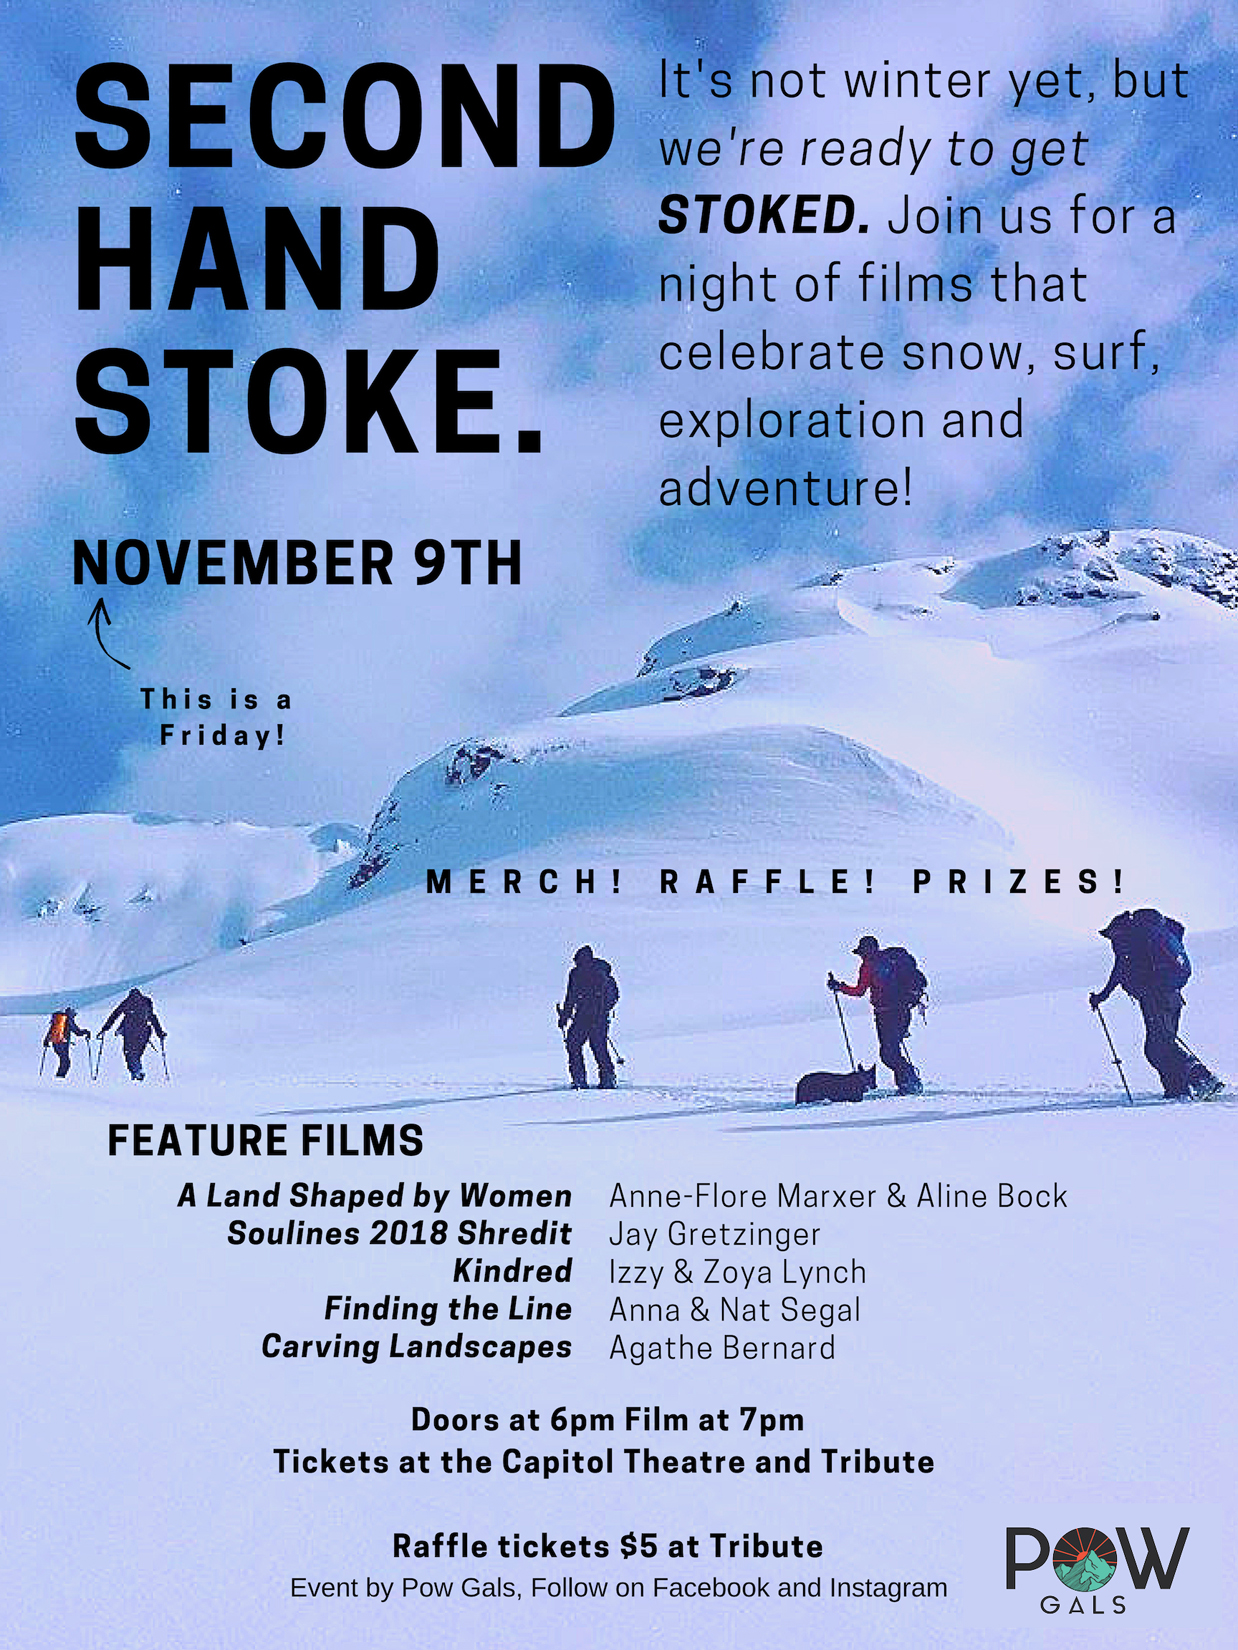 Pow Gals Presents Second Hand Stoke!